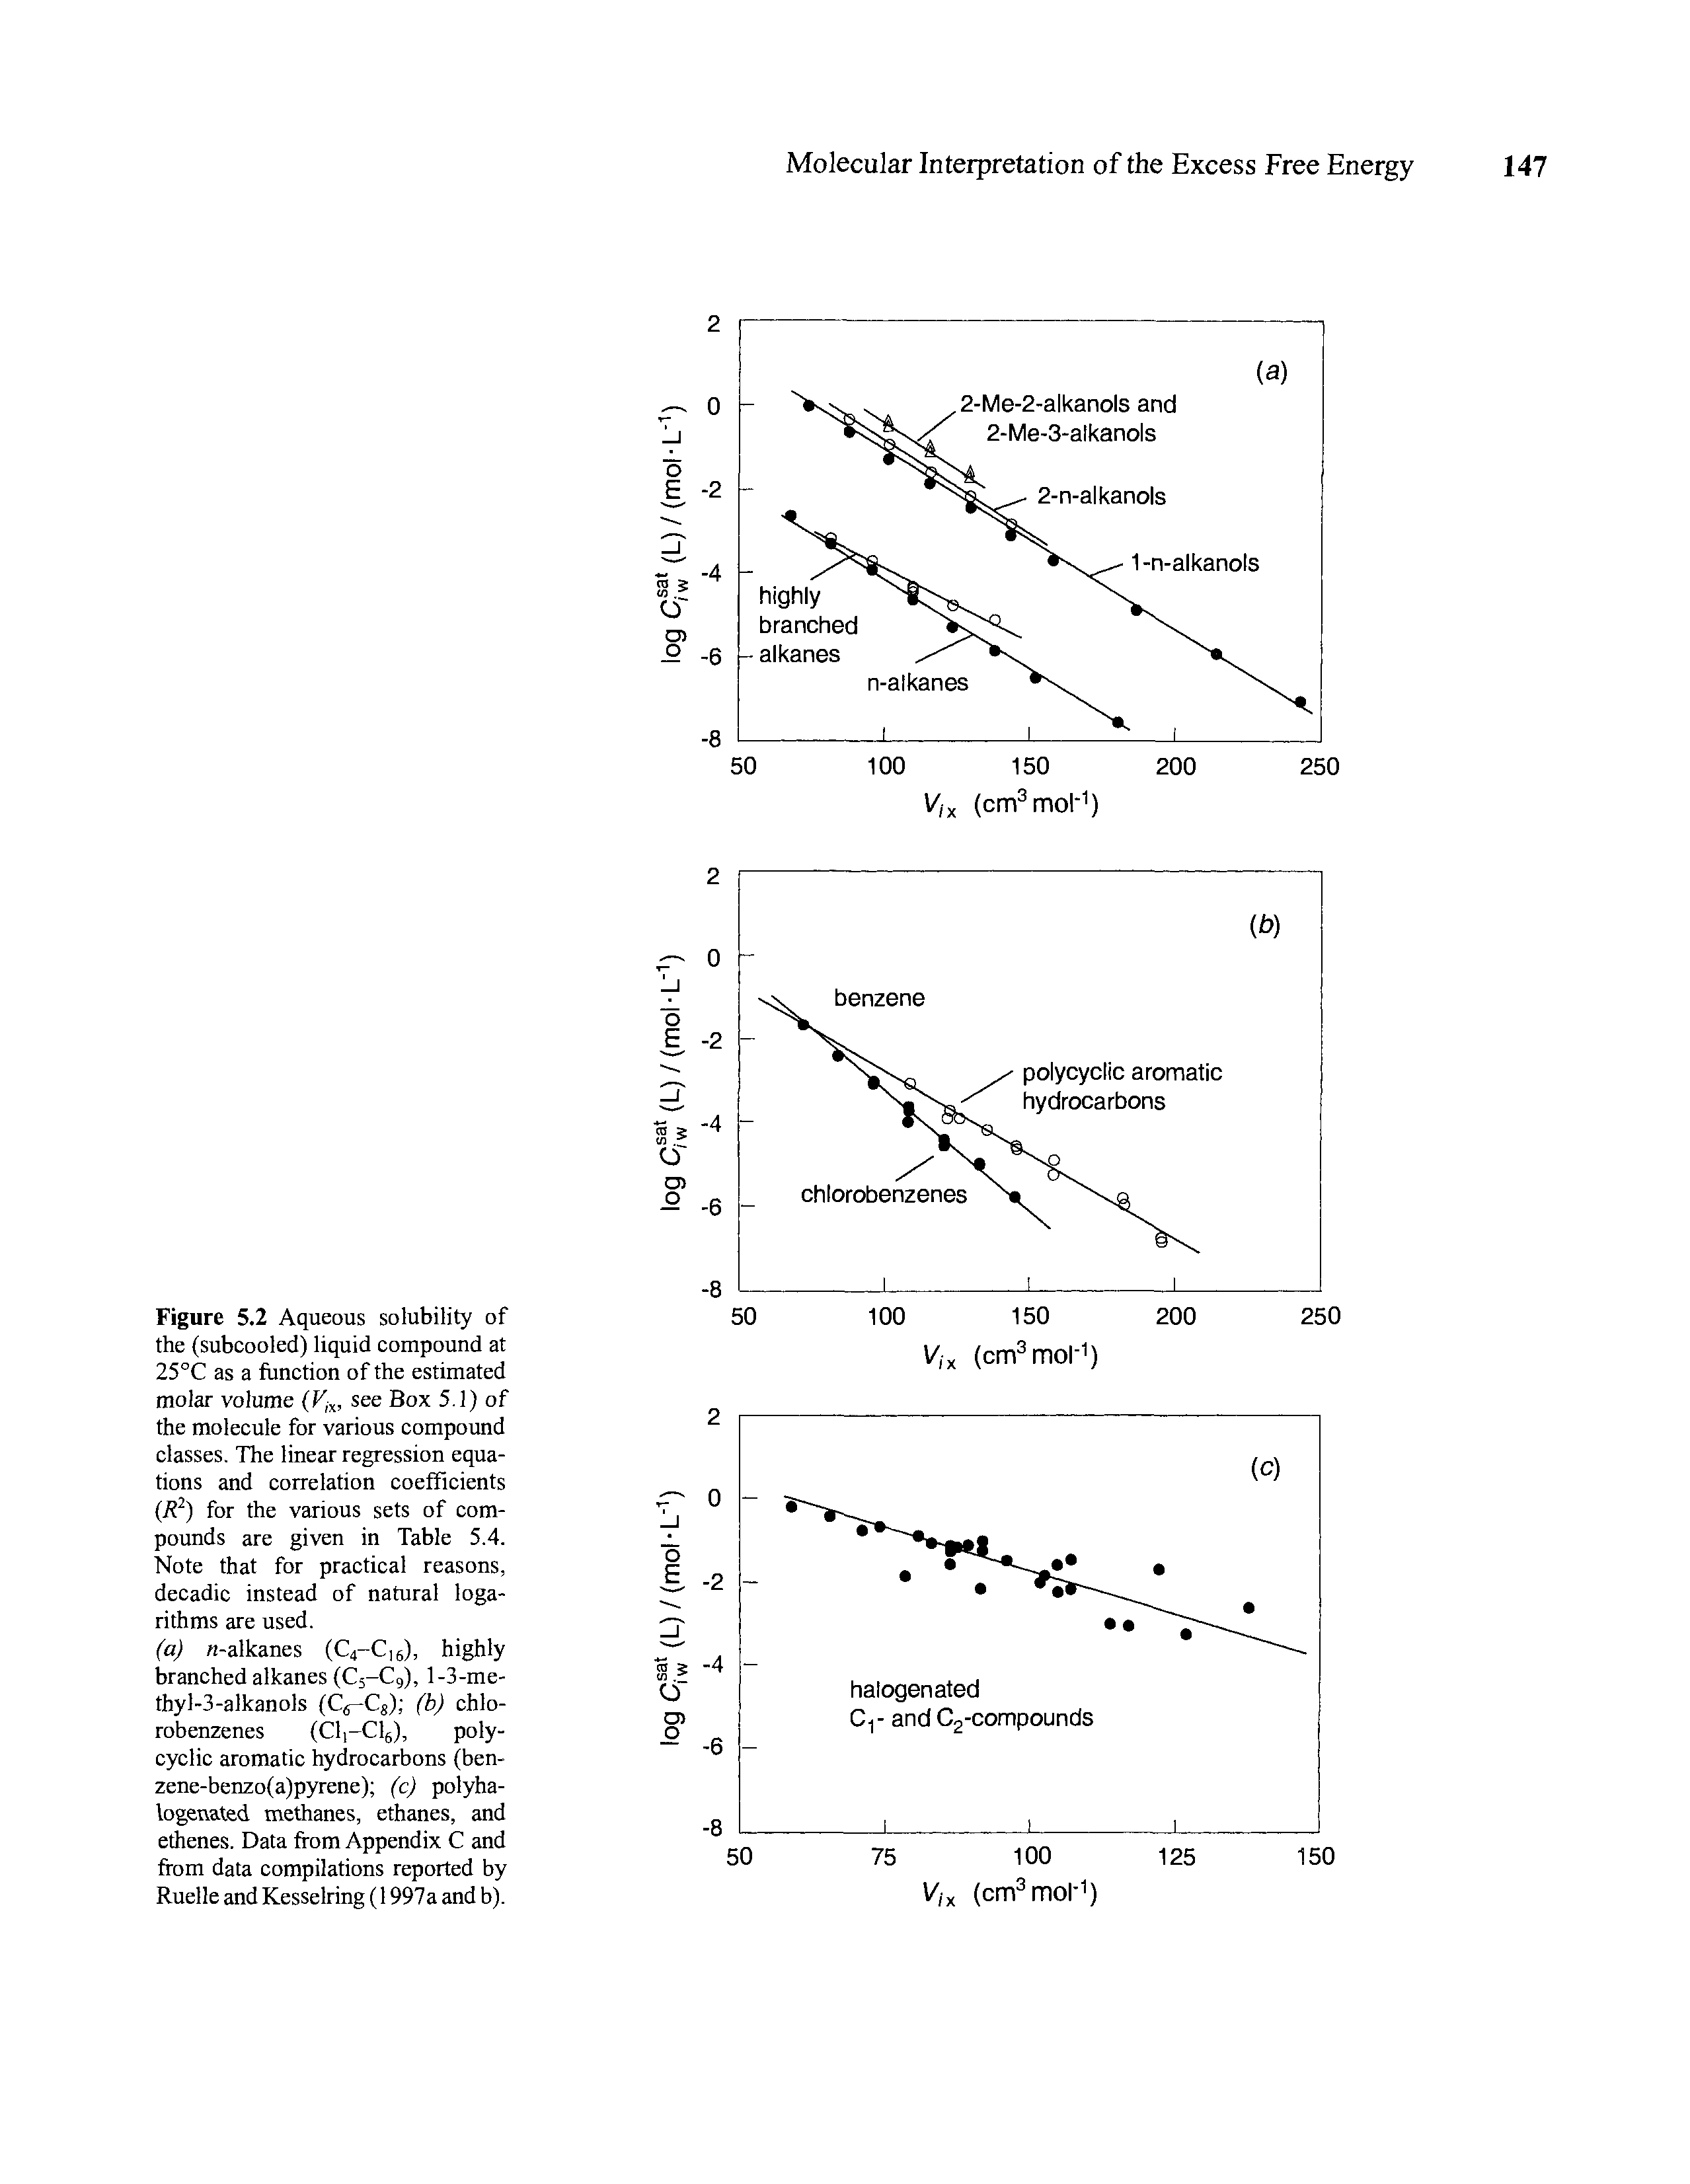 Figure 5.2 Aqueous solubility of the (subcooled) liquid compound at 25°C as a function of the estimated molar volume (Vjx, see Box 5.1) of the molecule for various compound classes. The linear regression equations and correlation coefficients (R2) for the various sets of compounds are given in Table 5.4. Note that for practical reasons, decadic instead of natural logarithms are used.